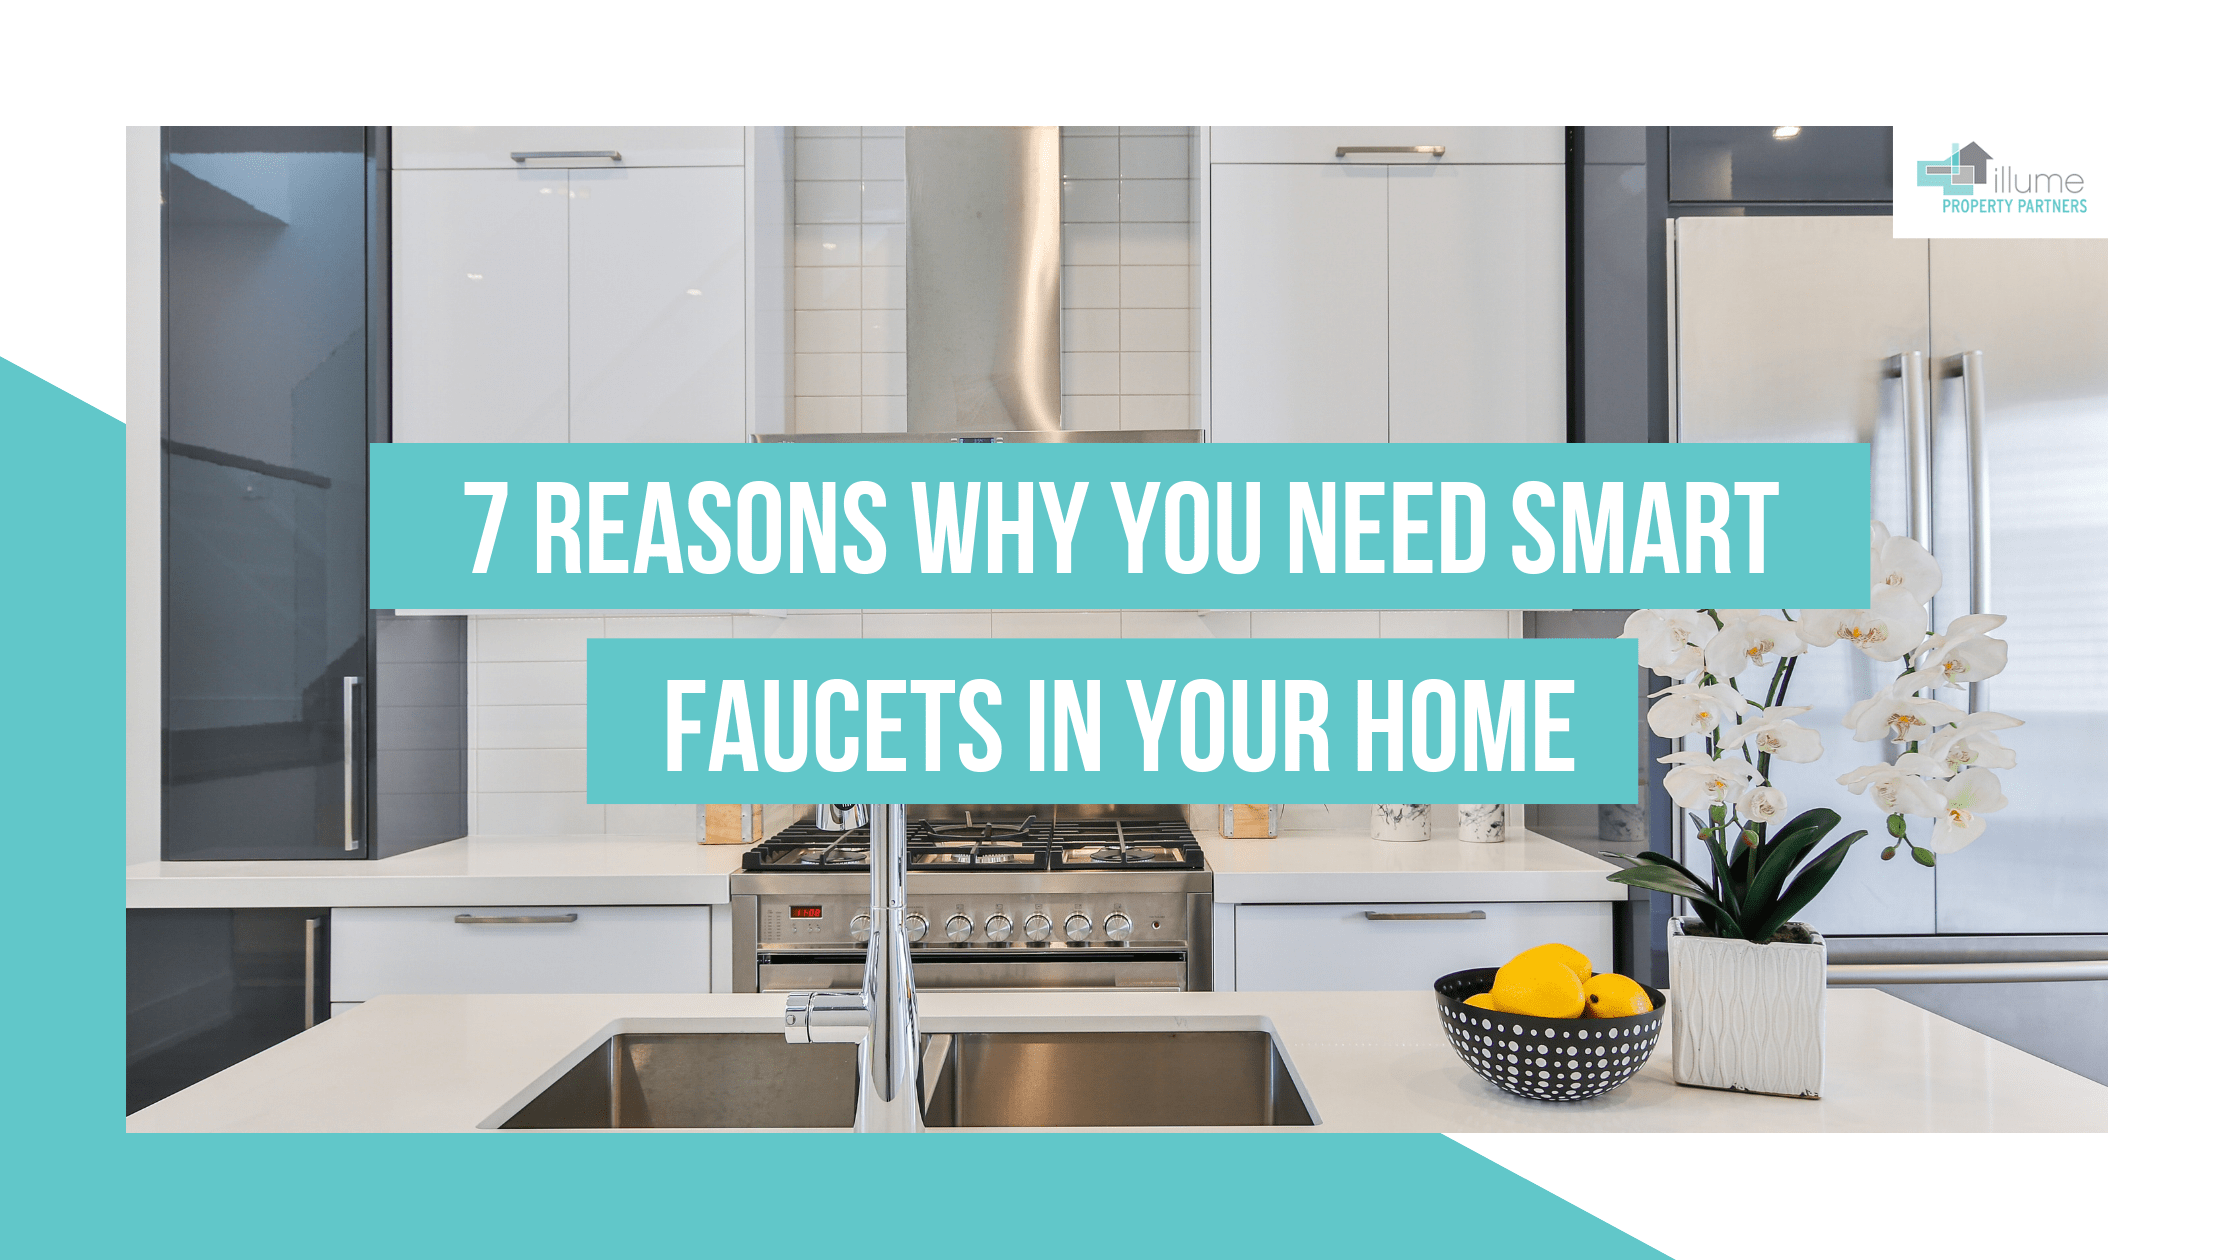 7 Reasons Why You Need Smart Faucets in Your Home